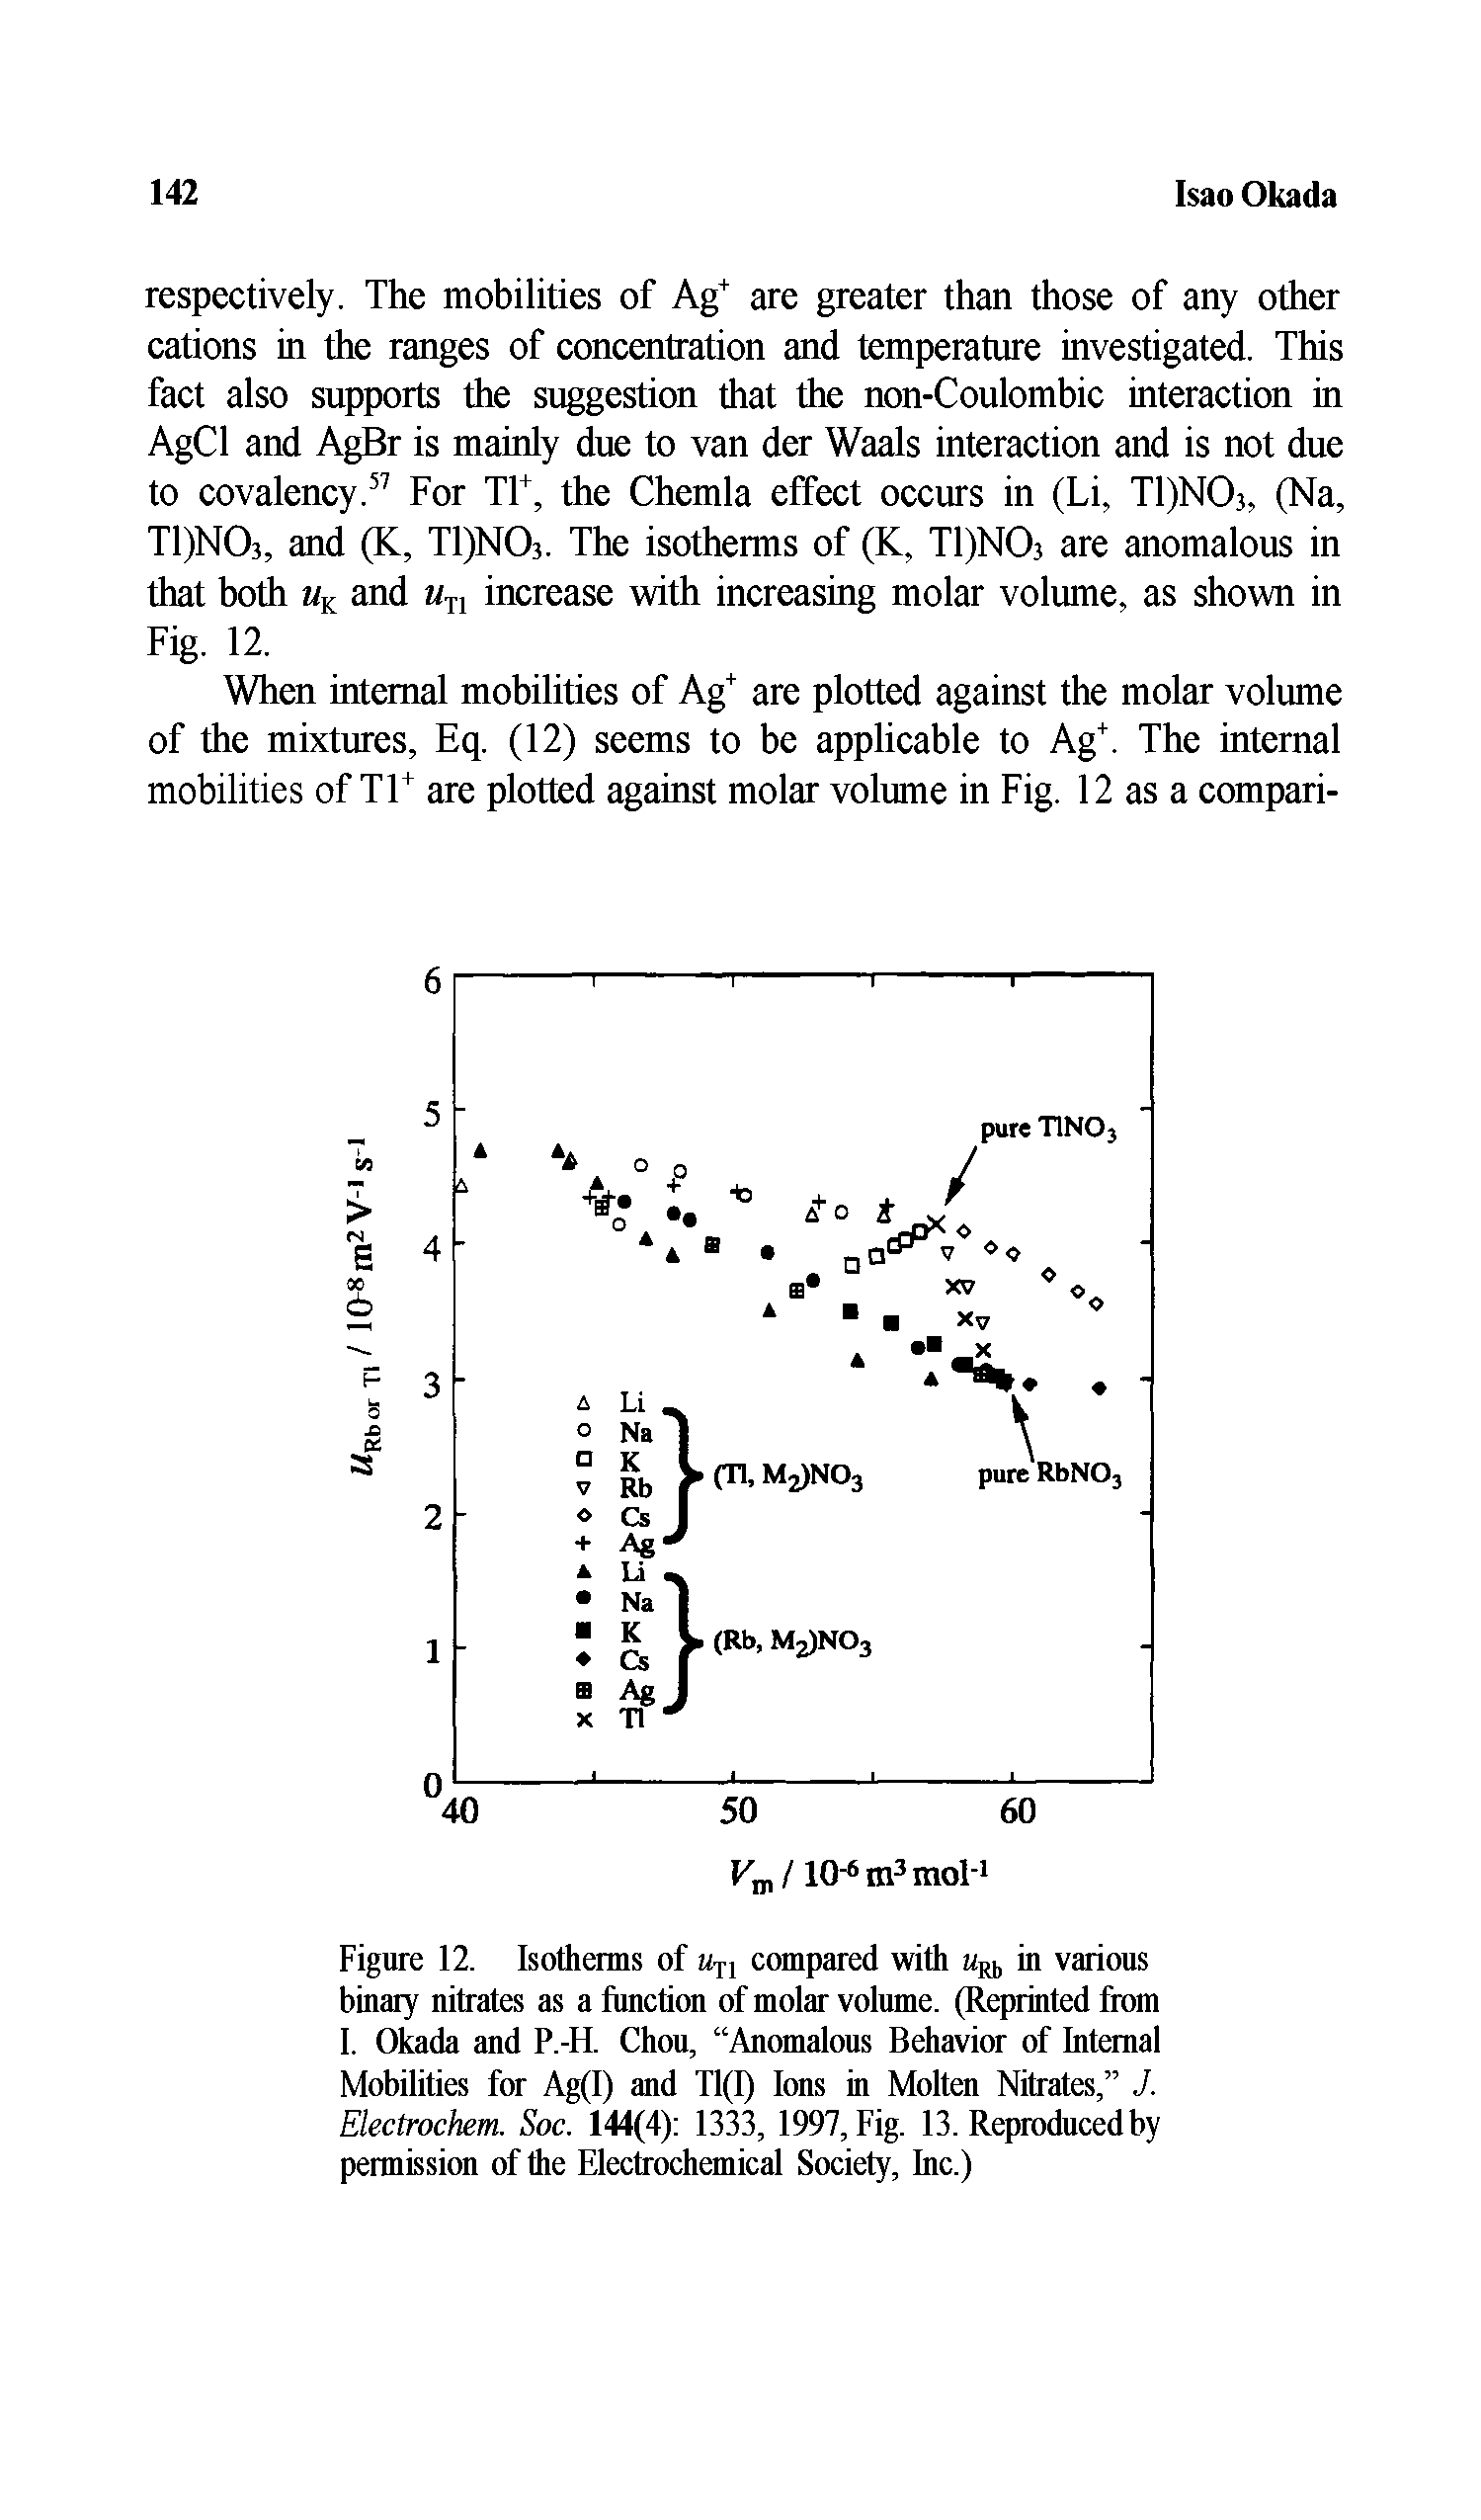 Figure 12. Isotherms of M-n compared with in various binary nitrates as a function of molar volume. (Reprinted from I. Okada and P.-H. Chou, Anomalous Behavior of Internal Mobilities for Ag(I) and T1(I) Ions in Molten Nitrates, J. Electrochem. Soc. 144(4) 1333, 1997, Fig. 13. Reproduced by permission of the Electrochemical Society, Inc.)...